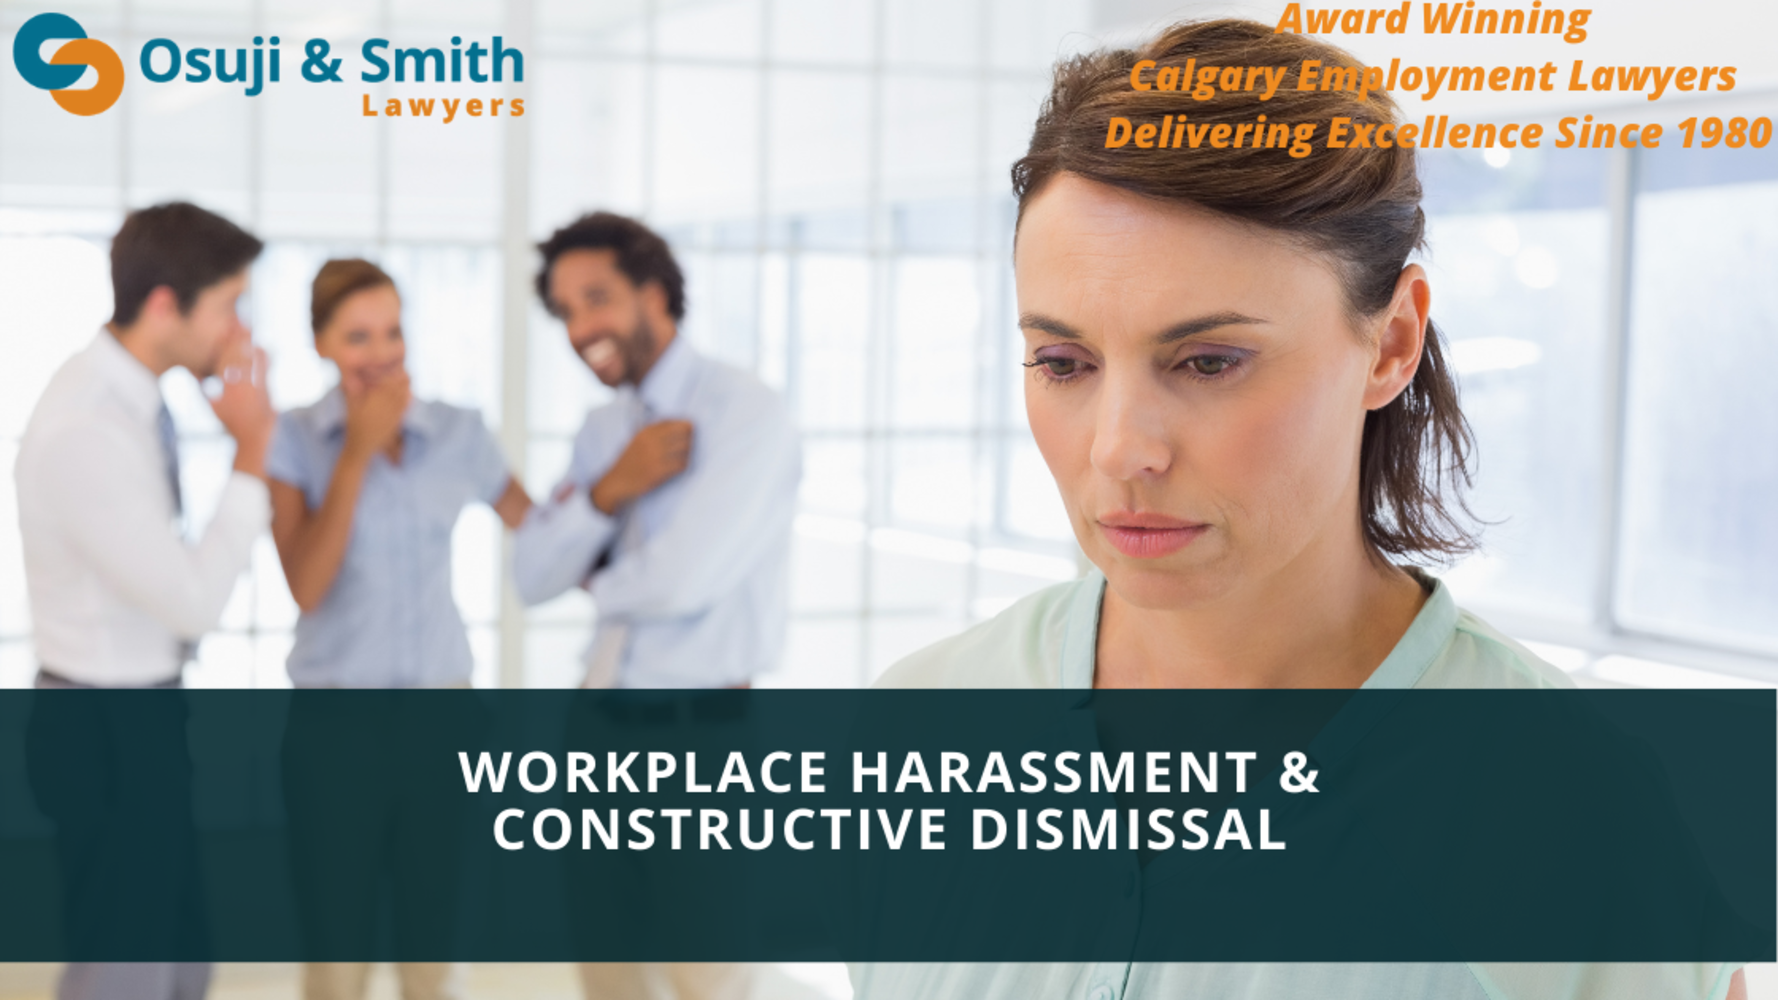 What Is Constructive Dismissal? Employment Lawyer In Calgary Explains